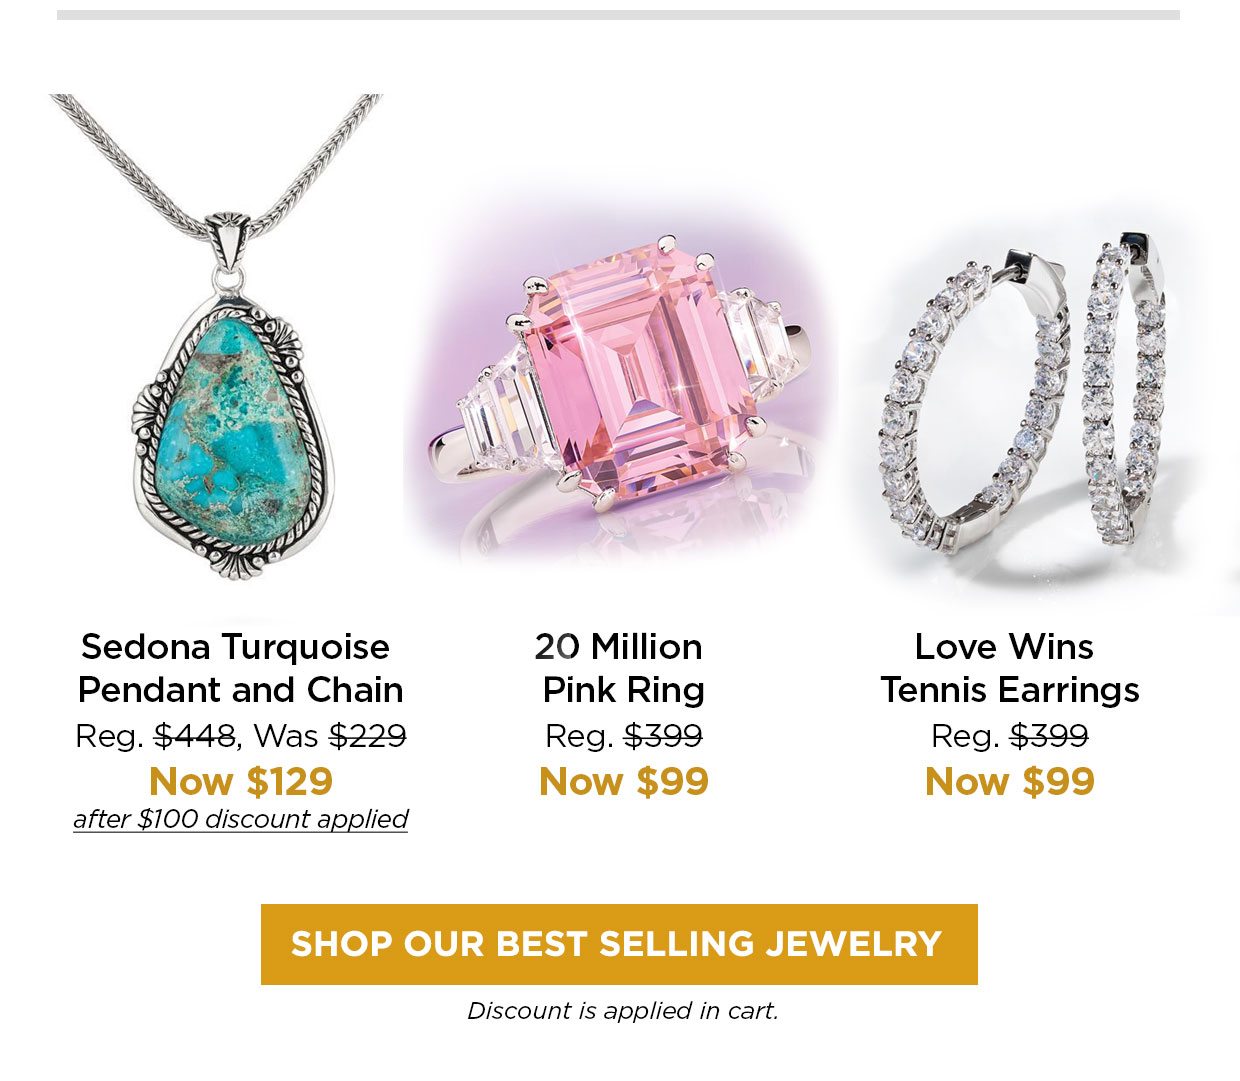 Sedona Turquoise Pendant and Chain Reg. $448, Was $229, Now $129 after $100 discount applied. 20 Million Pink Ring Reg. $399, Now $99. Love Wins Tennis Earrings Reg. $399, Now $99. SHOP OUR BEST SELLING JEWELRY. Discount applied in cart.